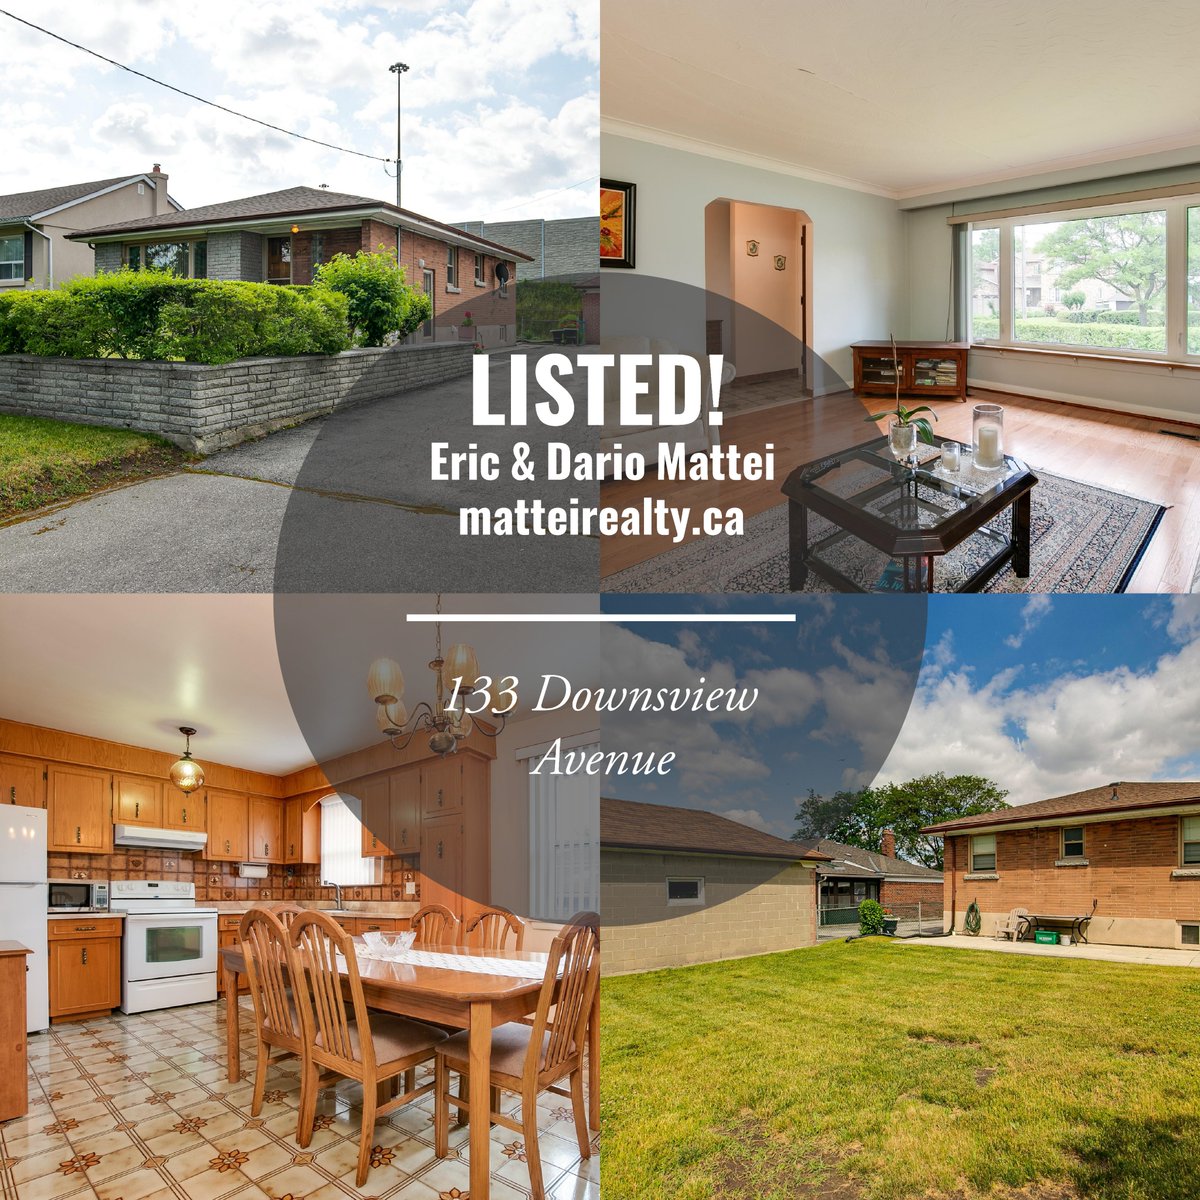 LISTED! 133 DOWNSVIEW AVENUE MLS W6147040

AN EXCELLENT TORONTO BUNGALOW LOADED WITH FEATURES! 
$998,000

matteirealty.ca/Residential/Fo…

#downsview, #listing, #newlisting, #northyork, #york, #toronto, #torontorealestate, #home, #house, #justlisted, #mattei, #matteirealty,